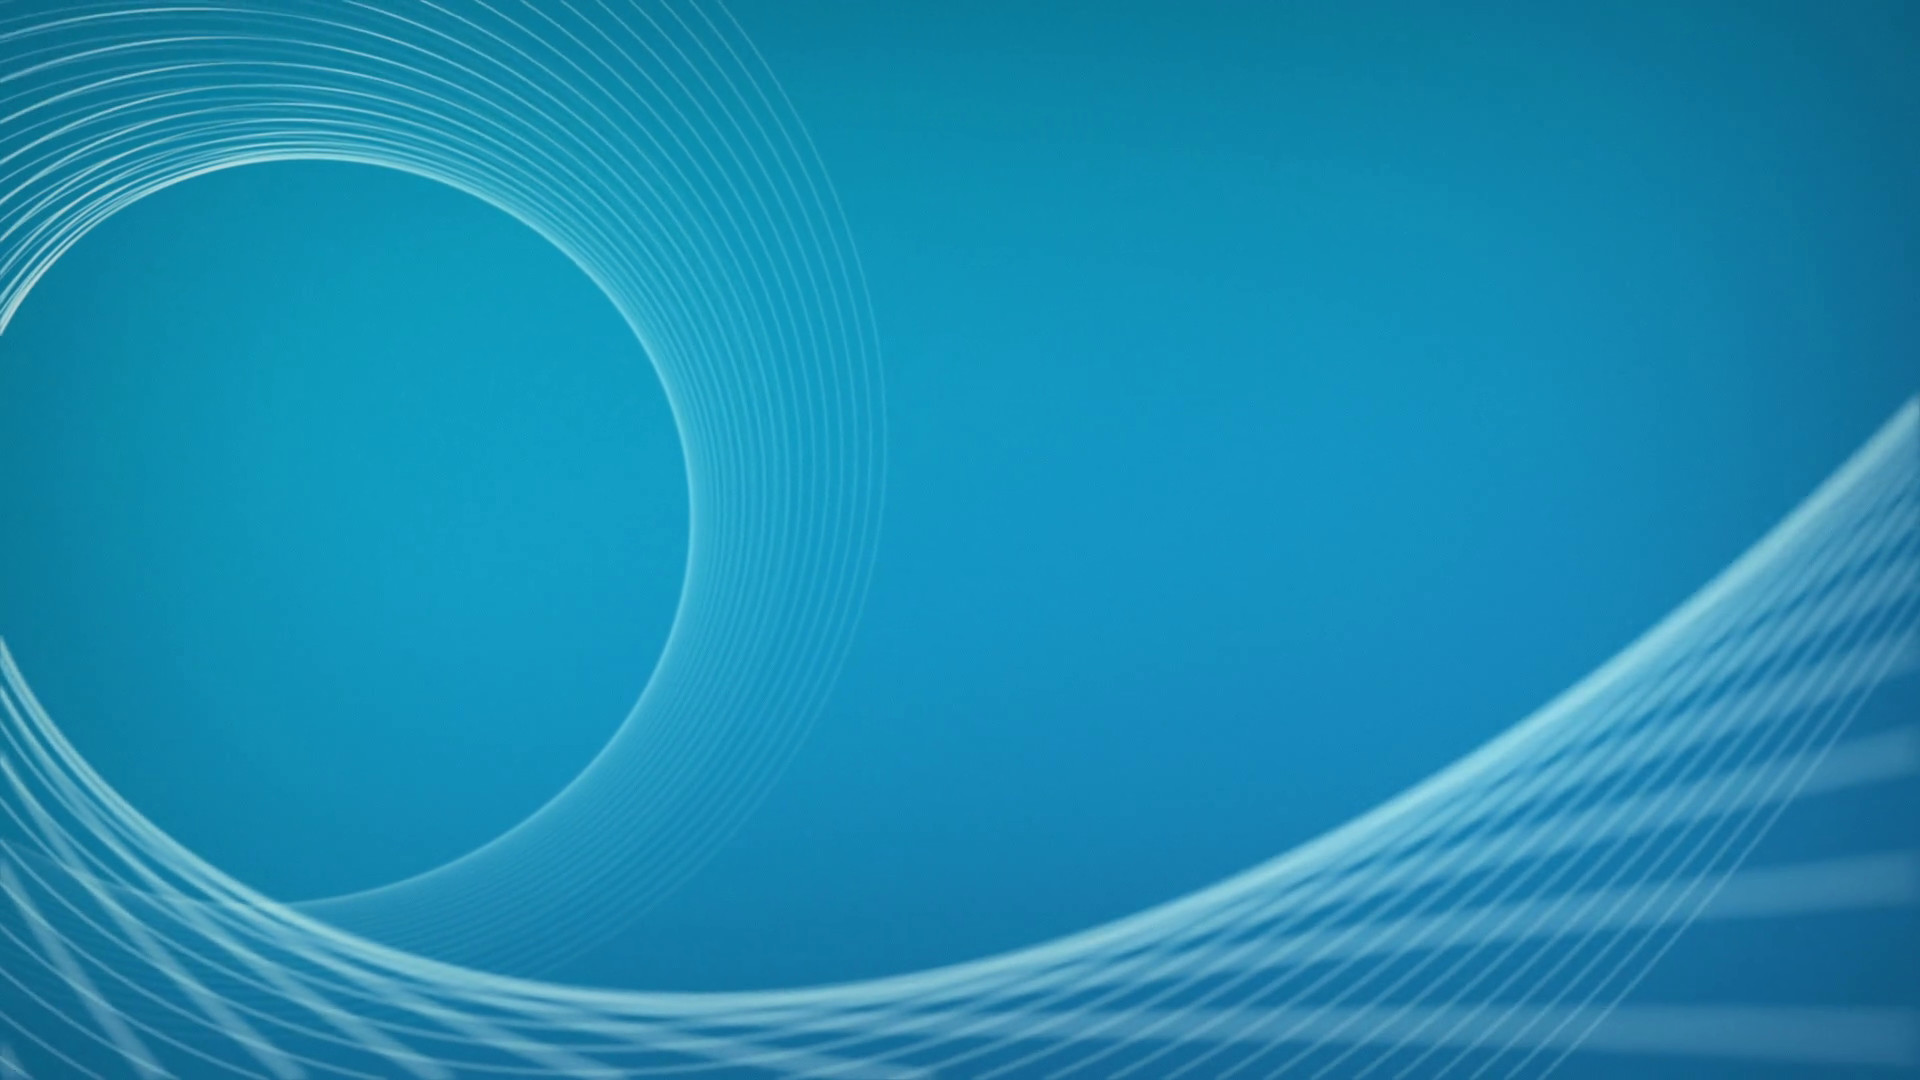 1920x1080 Elegant Professional Sophisticated Business Corporate Motion Background  Seamless Loop Cyan Light Sky Blue Turquoise Motion Background - VideoBlocks